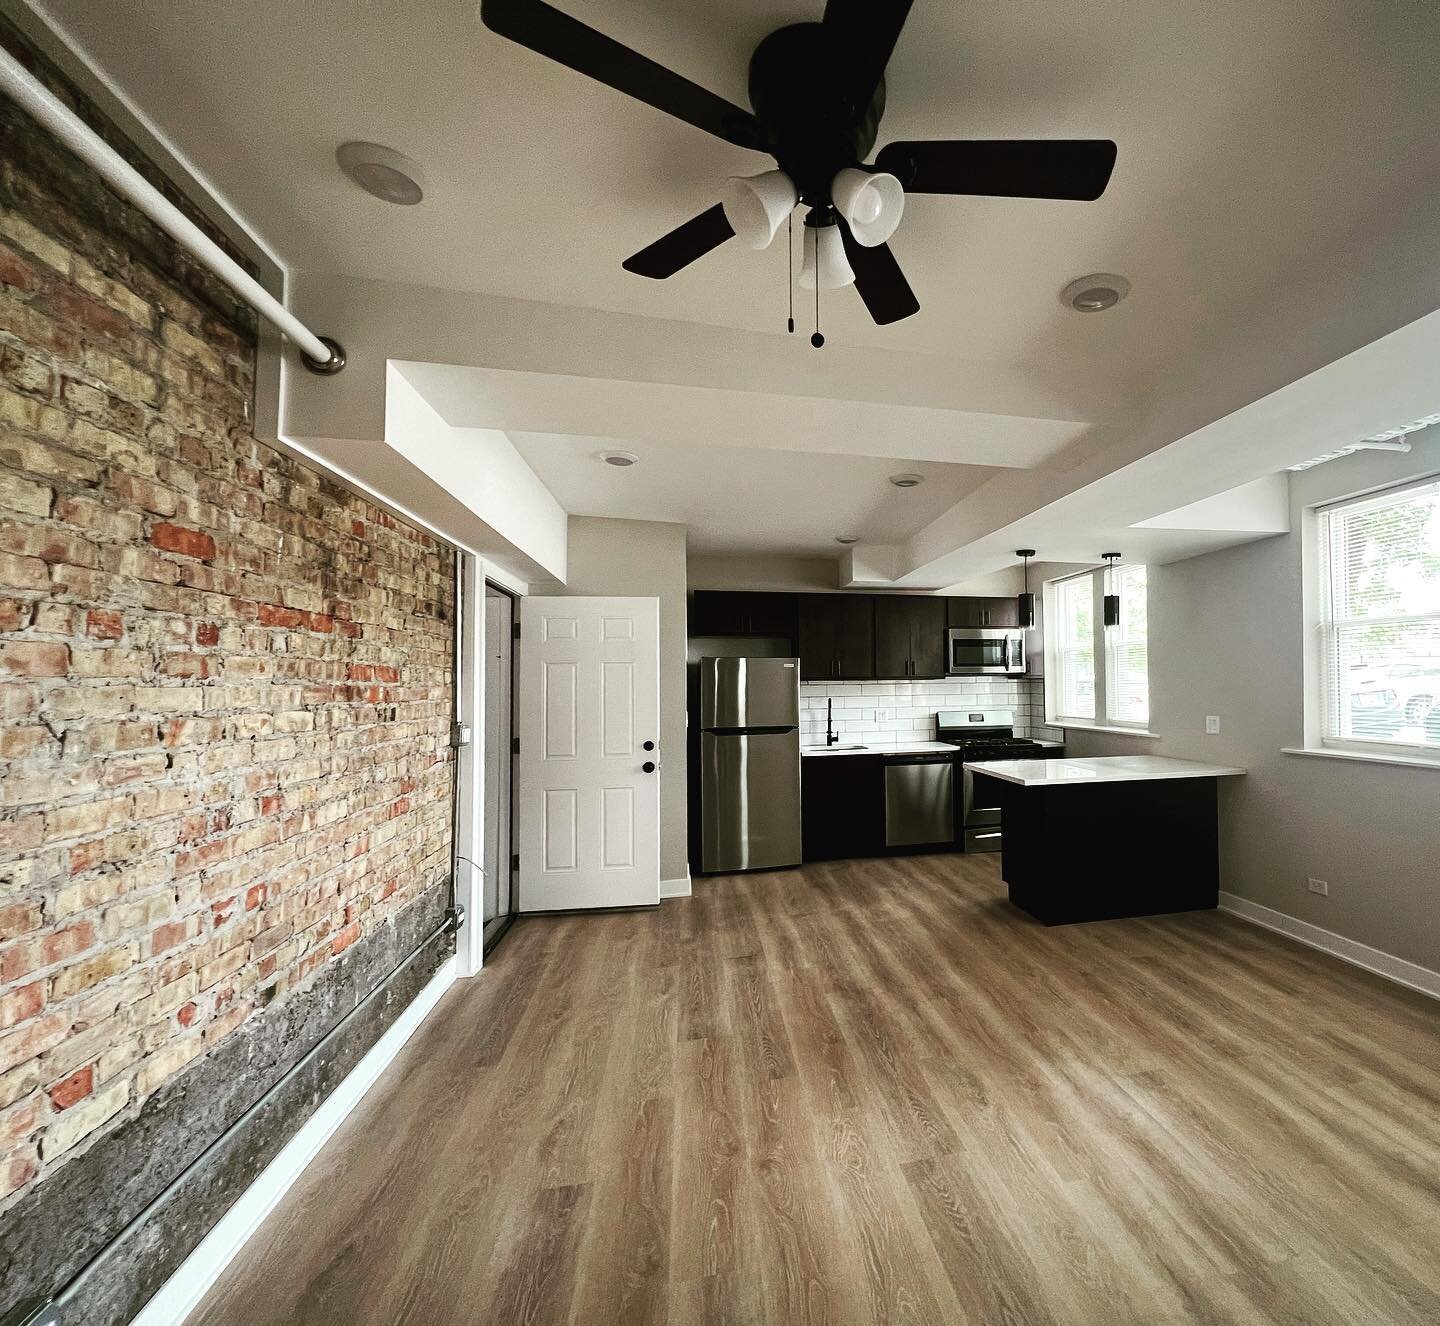 Modern exposed brick 2023.

Providing affordable housing in Chicago since 2013.

www.gregorarzgroup.com